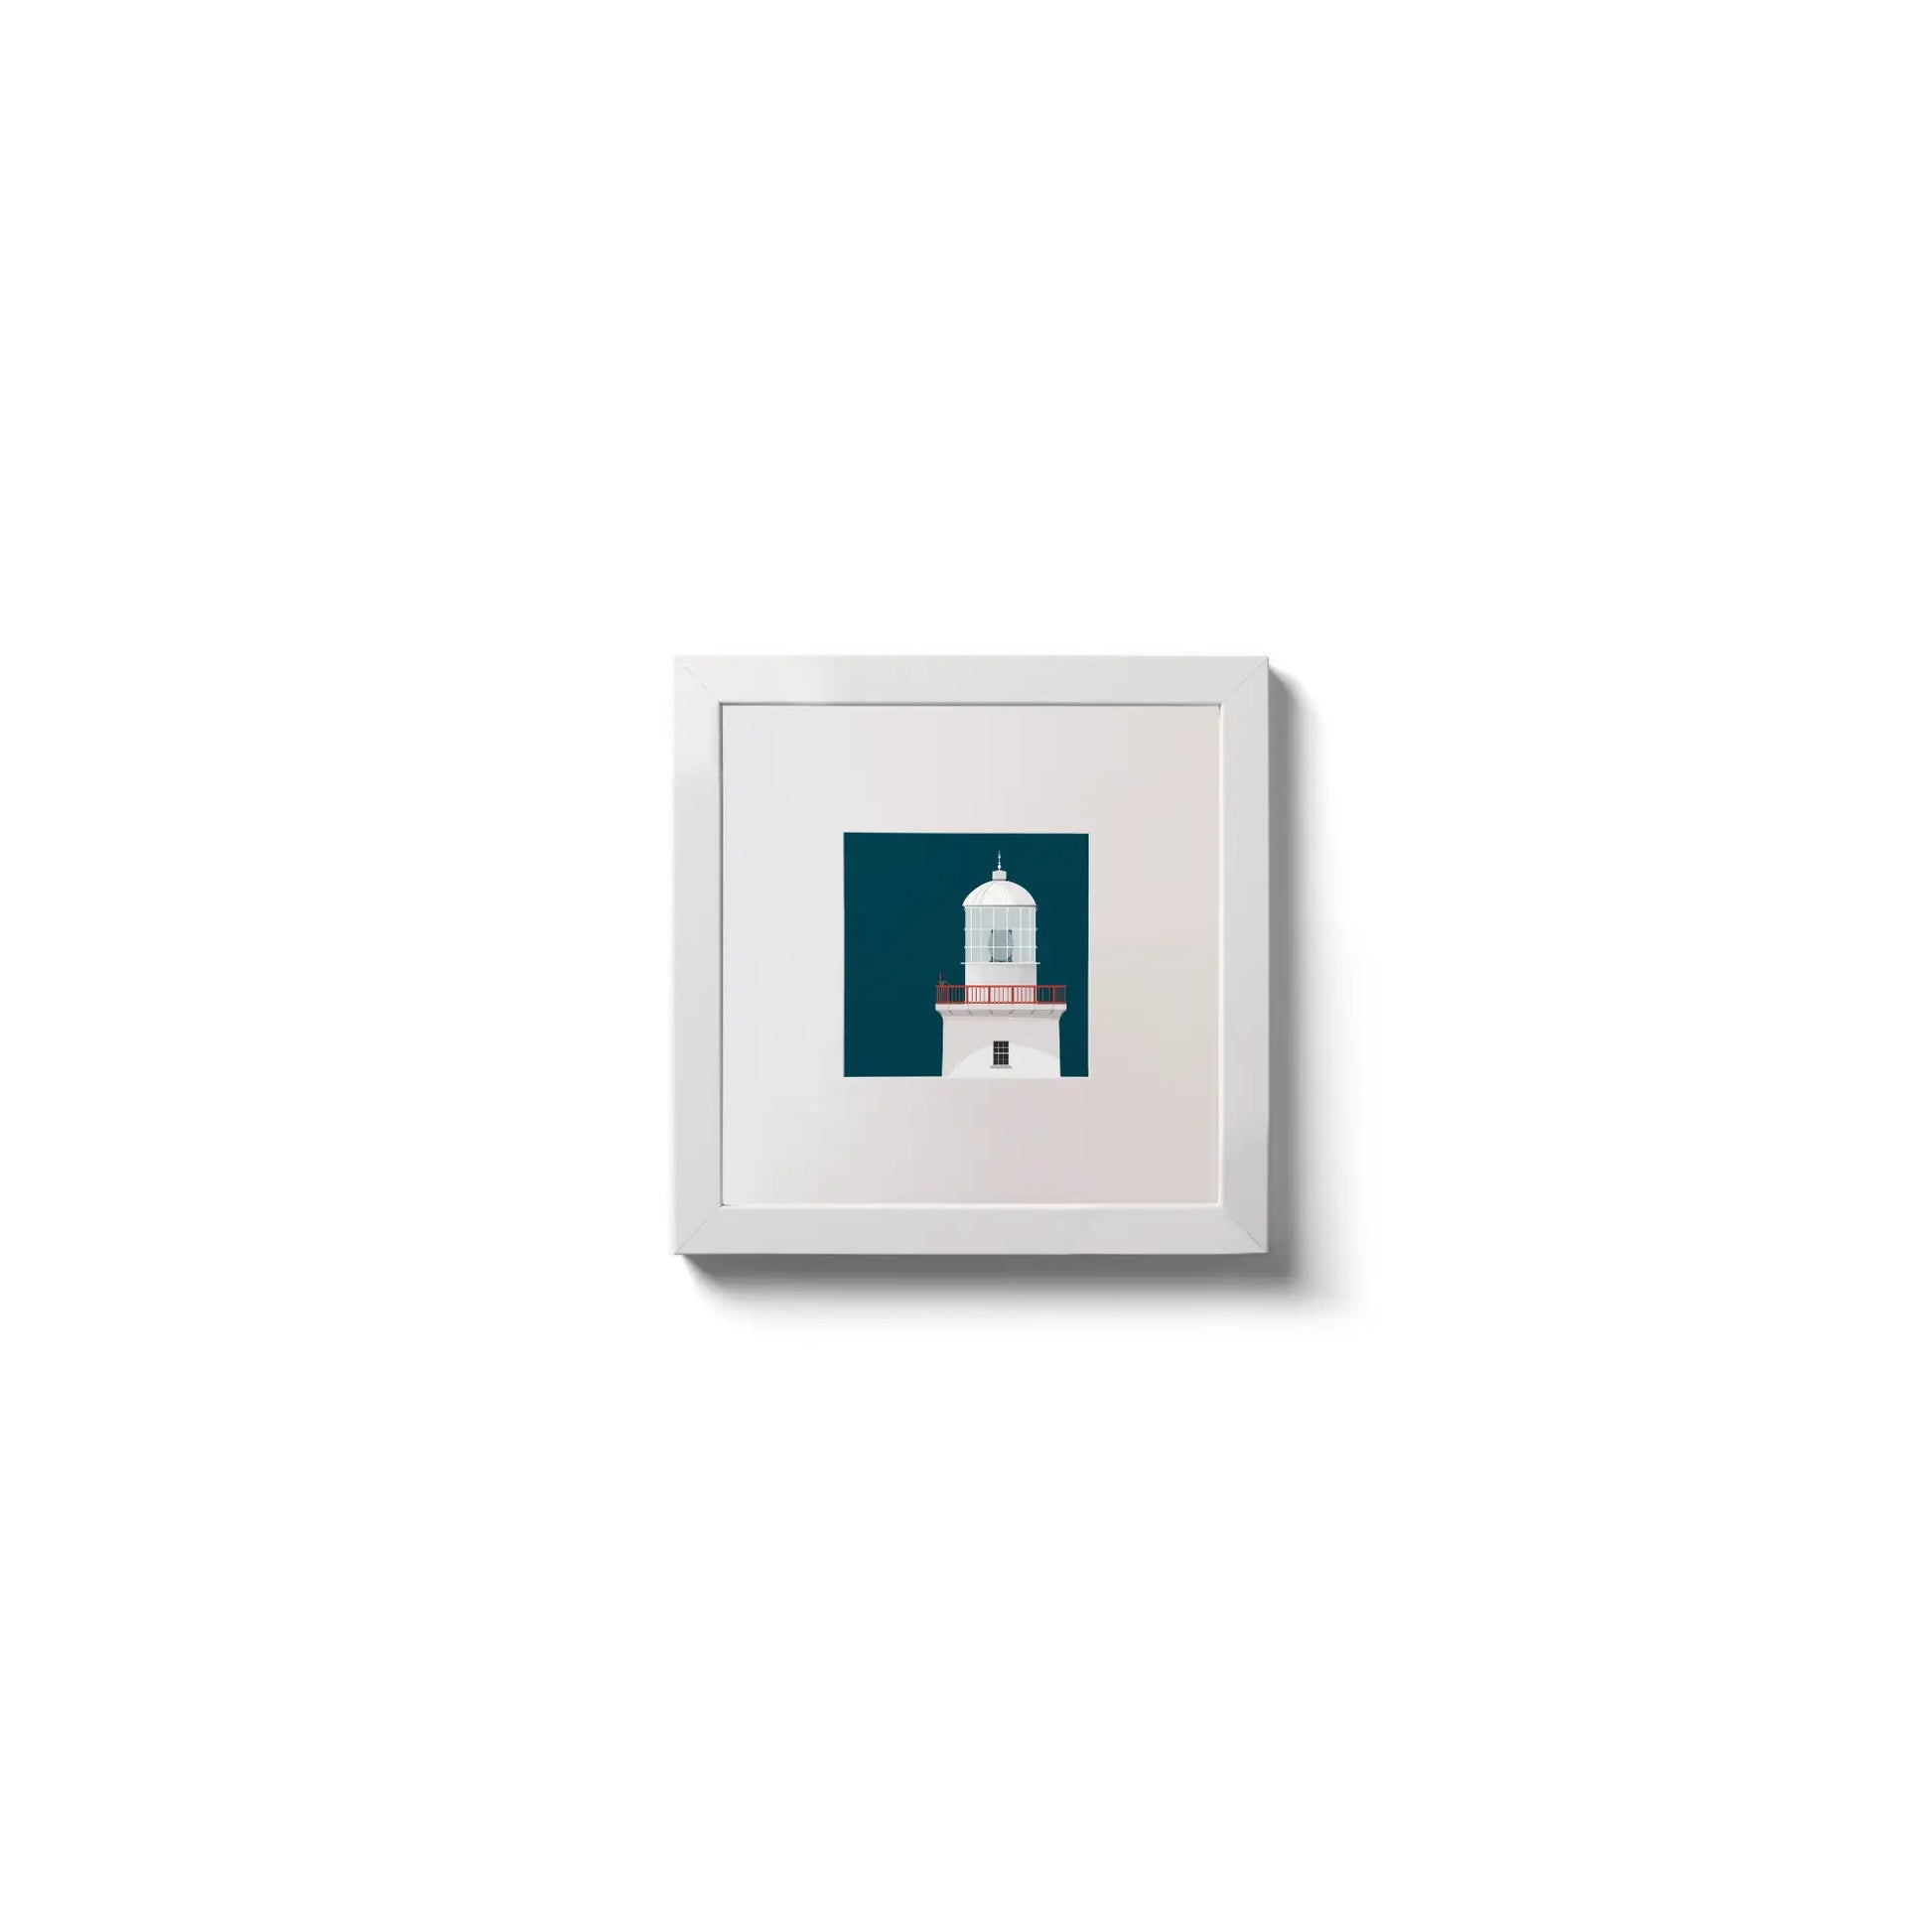 Illustration of Arranmore lighthouse on a midnight blue background,  in a white square frame measuring 10x10cm.